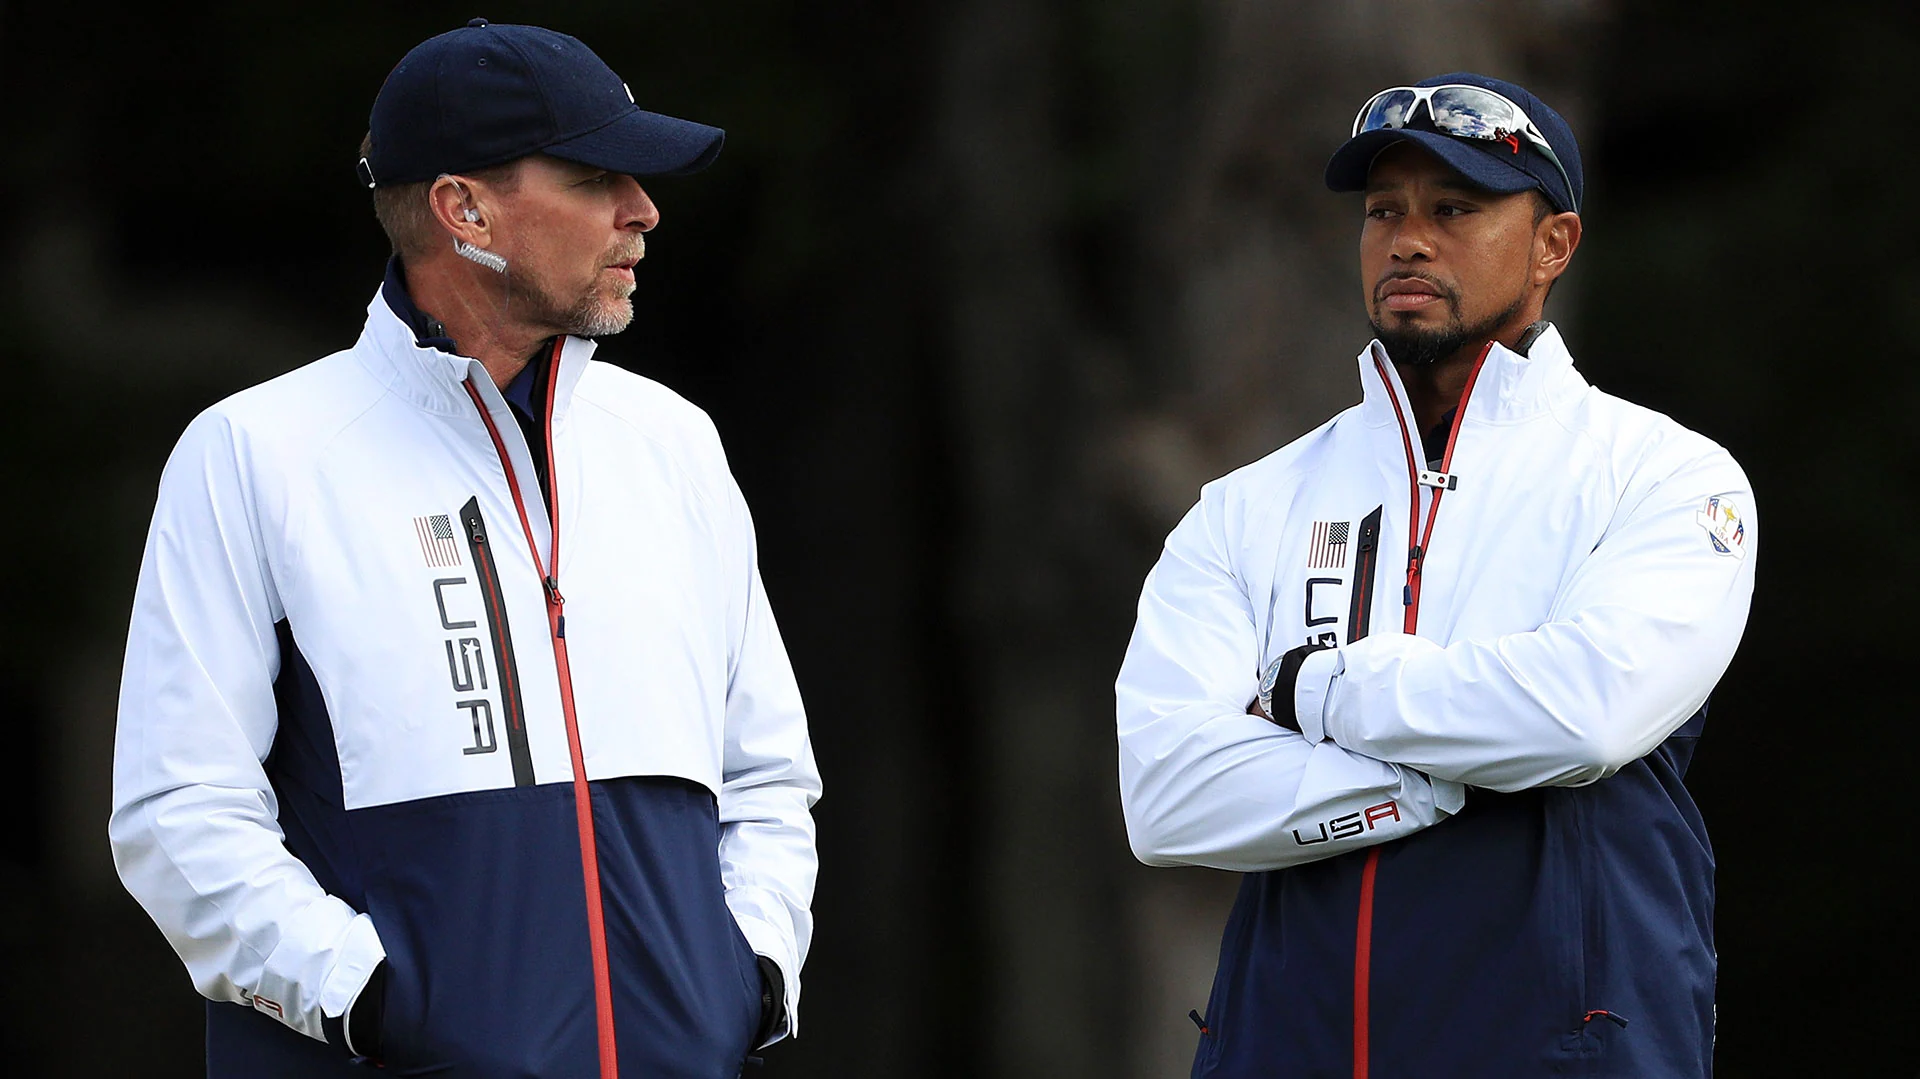 2021 Ryder Cup: Will Tiger Woods be at Whistling Straits? U.S. captain Steve Stricker: ‘Probably not’